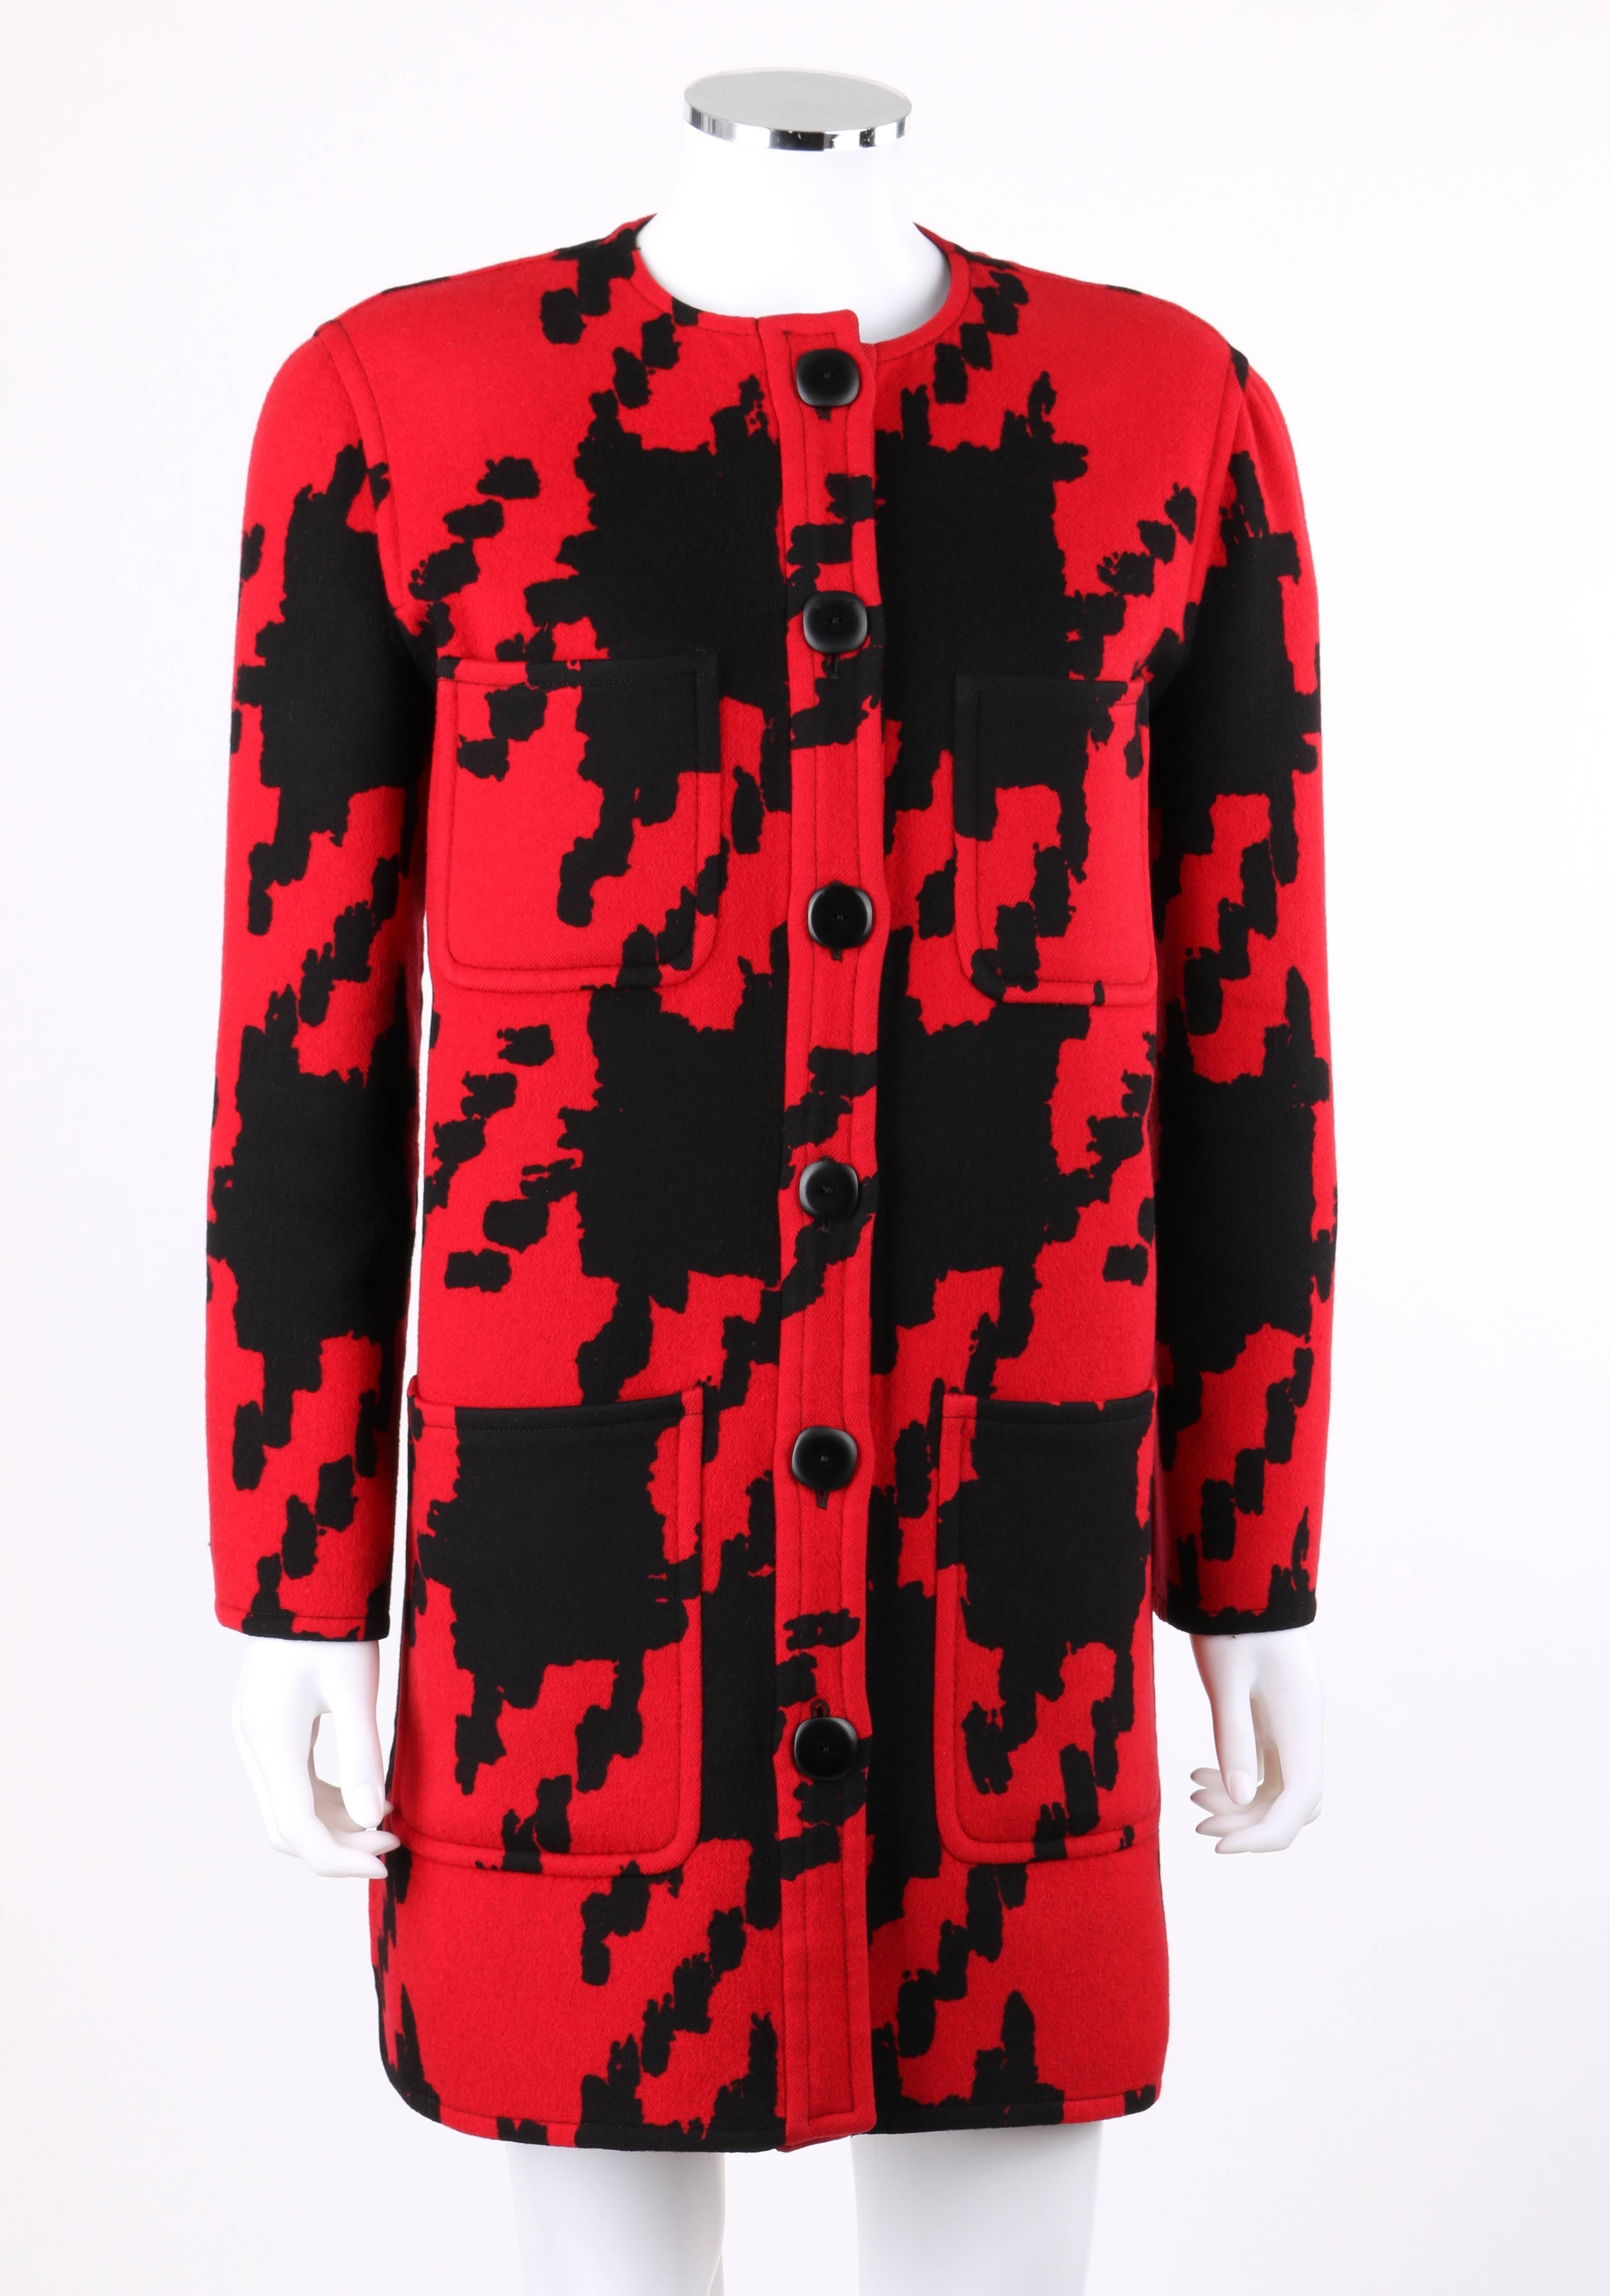 Vintage Valentino Boutique c.1980's red and black over-sized houndstooth print wool car coat. Long sleeves with two button detail at cuff. Crew neckline. Six center front square button closures. Four large patch pockets at front. Two side seam